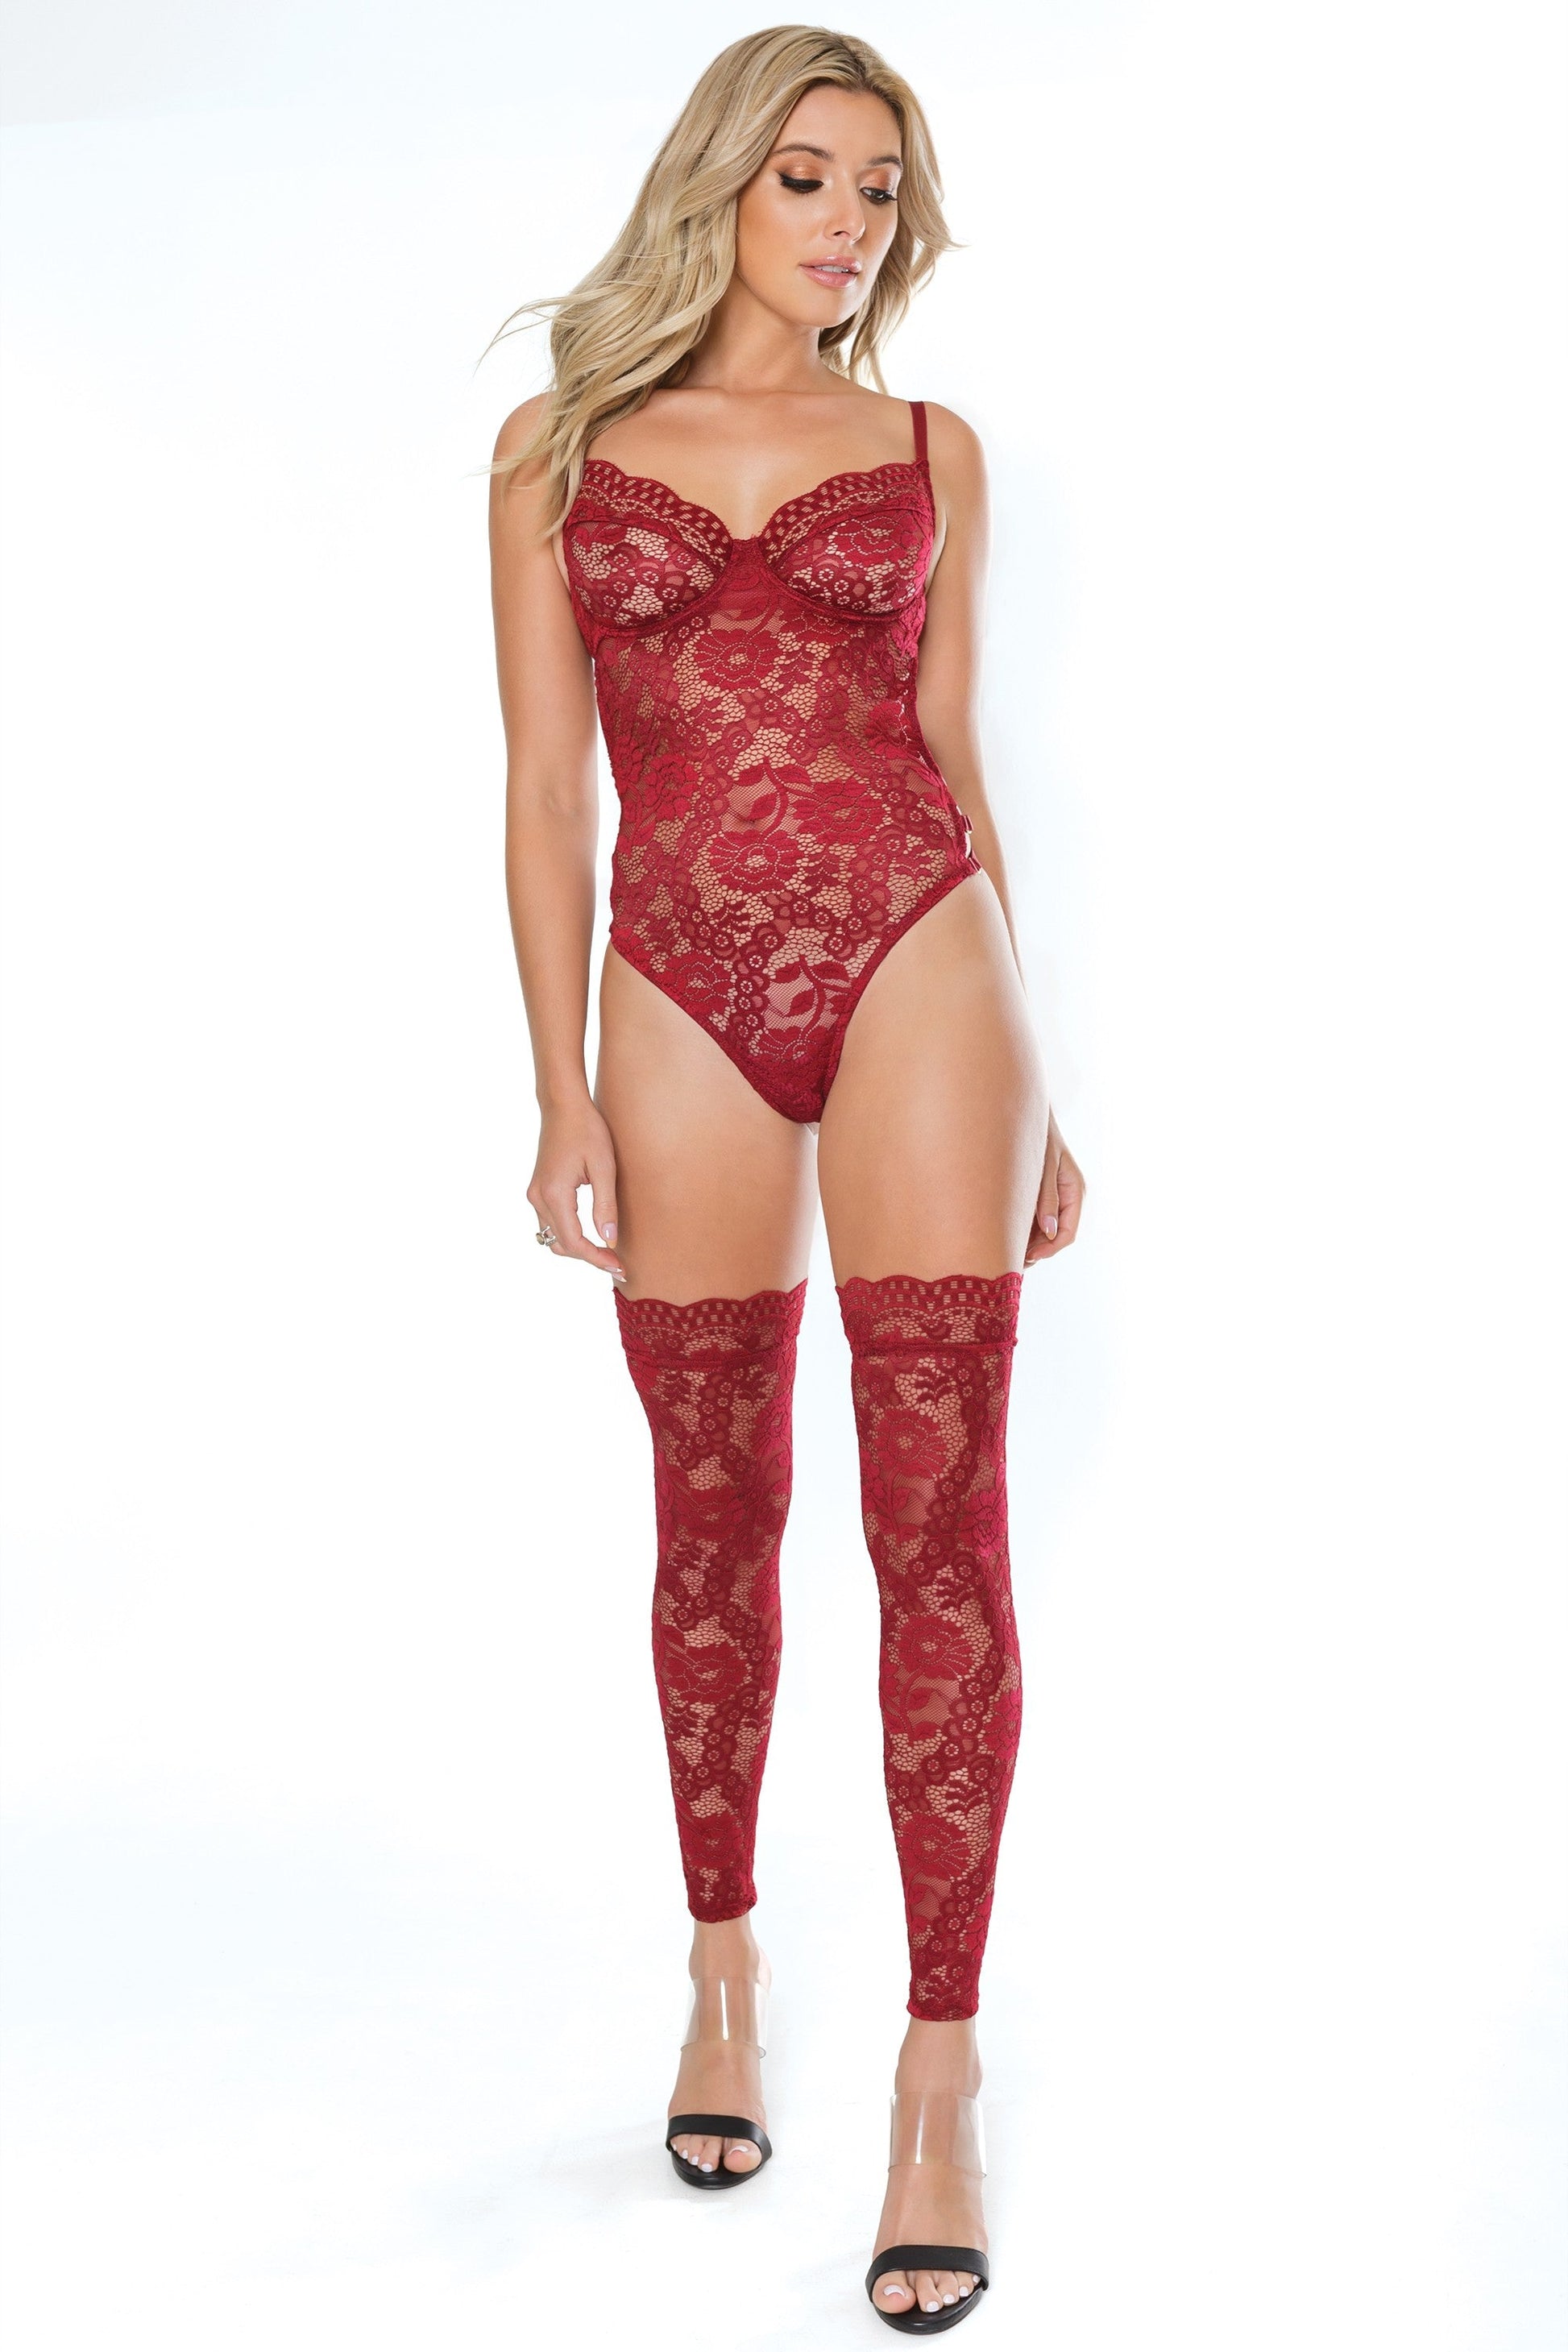 Coquette Ruby Red Scallop Stretch Lace Teddy - XOXTOYS